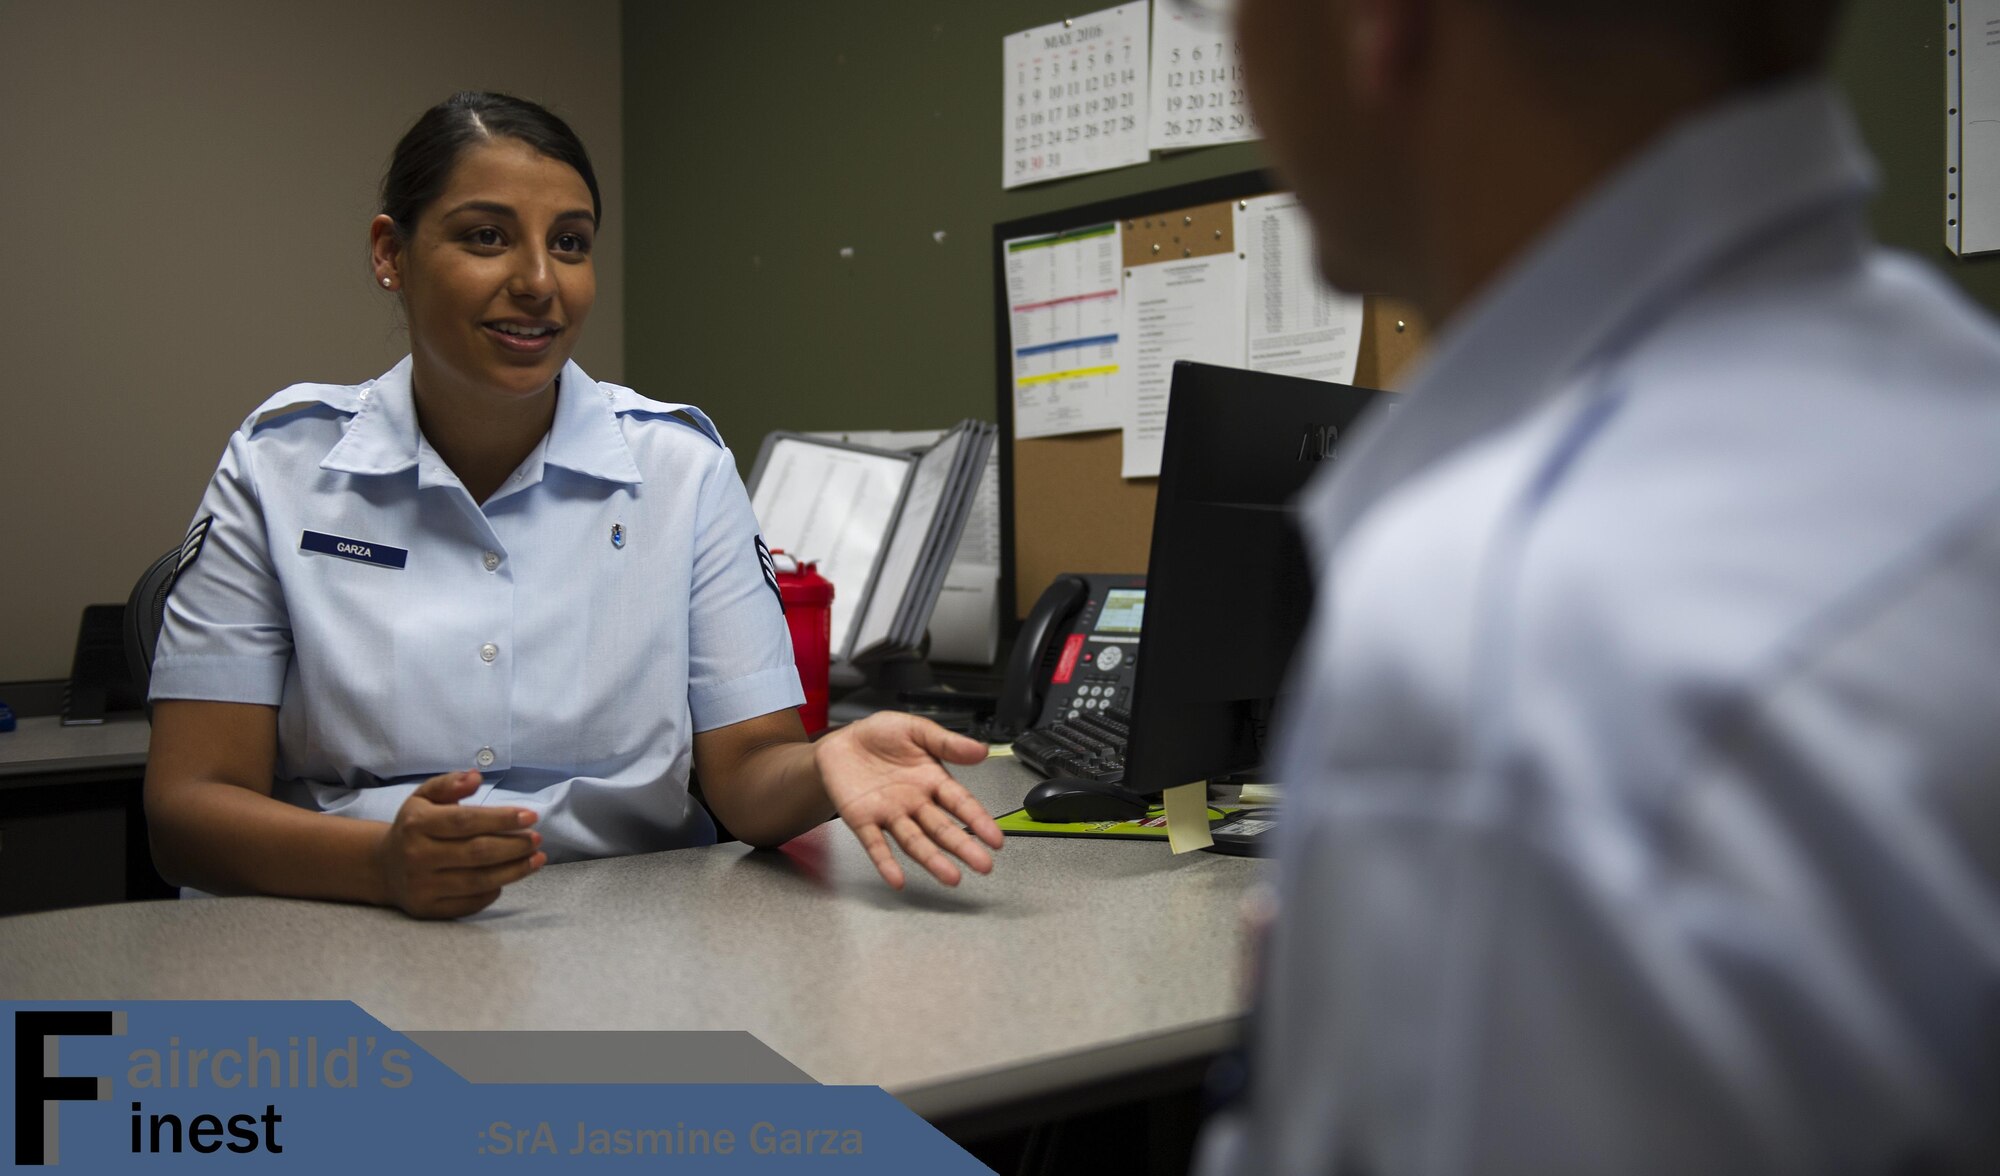 Senior Airman Jasmine Garza, 92nd Medical Operations Squadron mental health technician, talks with a patient July 29, 2016 at Fairchild Air Force Base, Wash. Her leadership selected her as one of Fairchild’s Finest, a weekly recognition program that highlights top-performing Airmen. (U.S. Air Force photo/Airman 1st Sean Campbell)